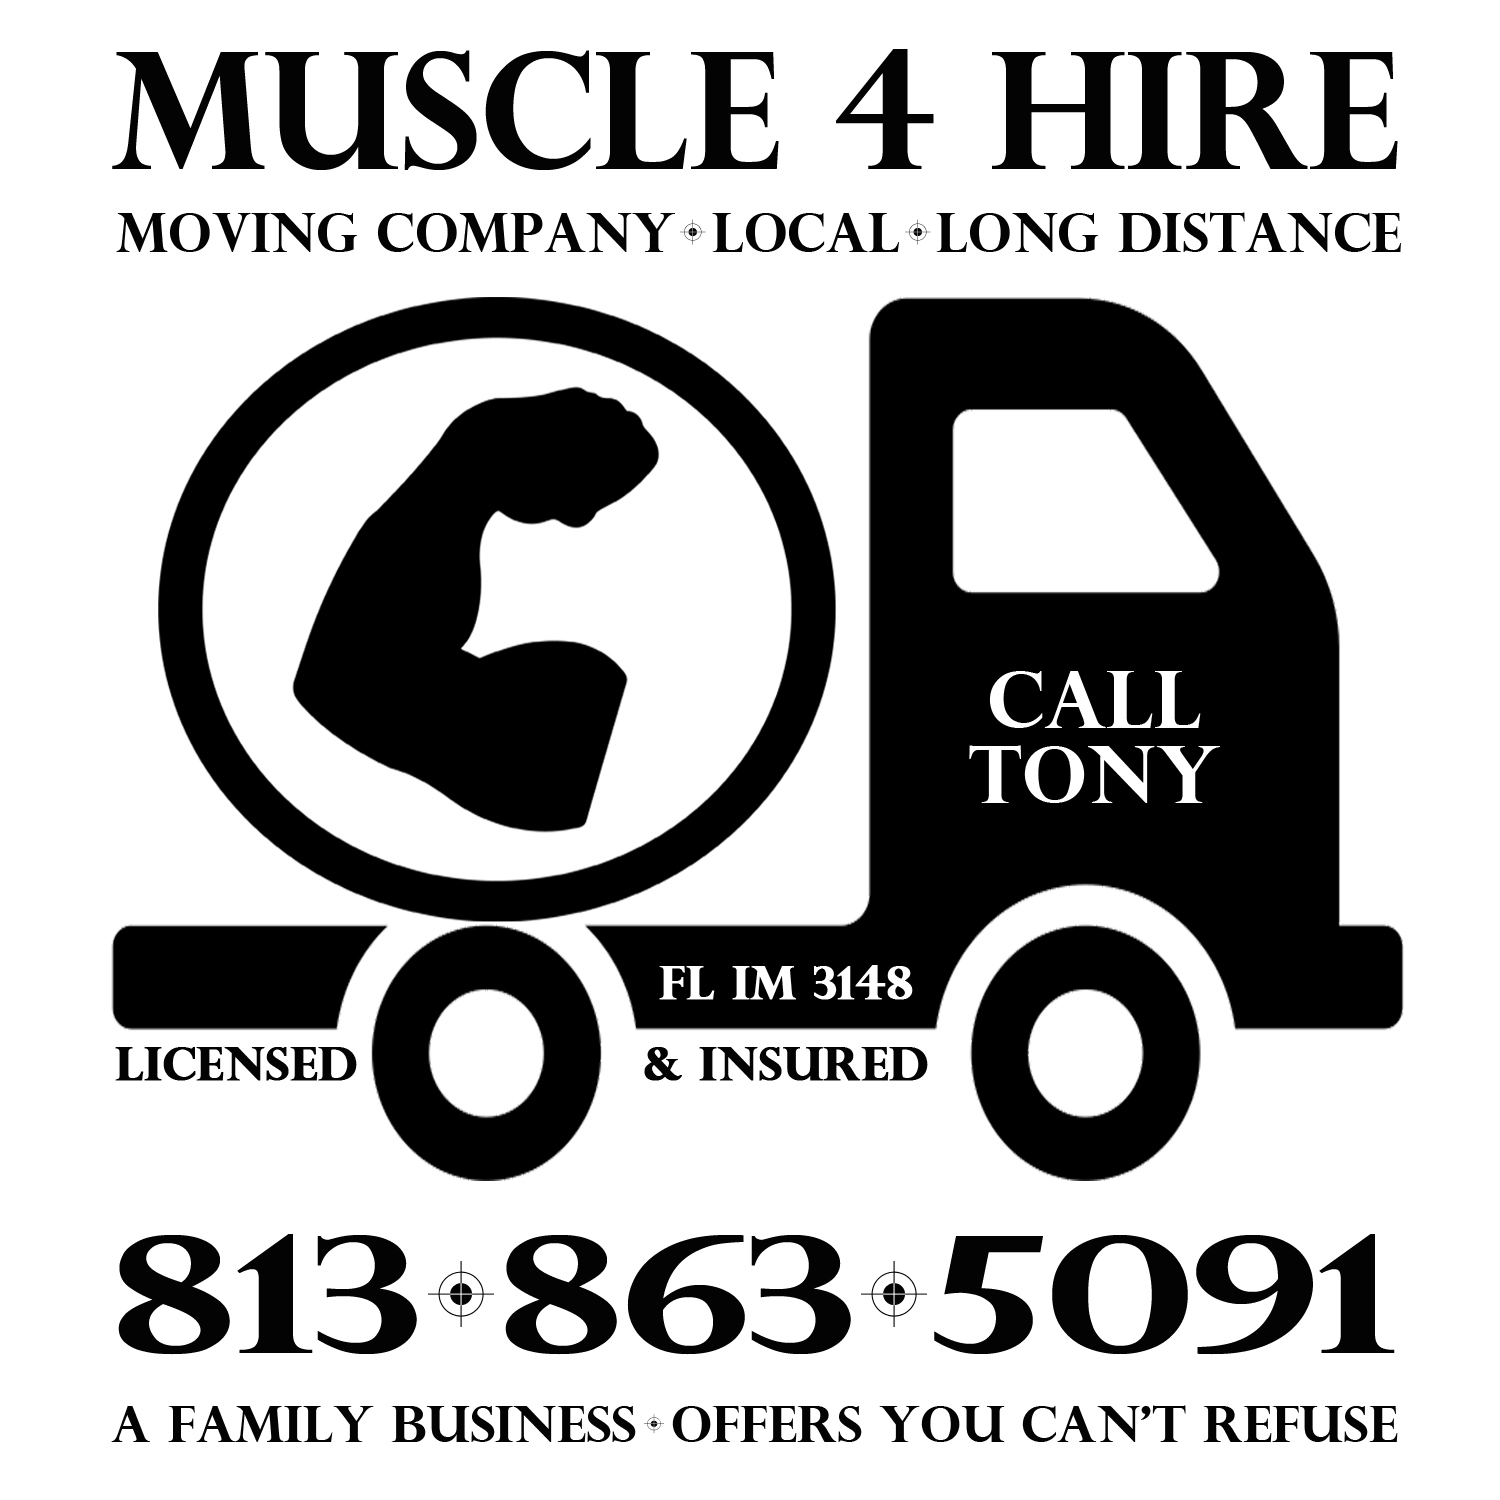 Muscle 4 Hire Moving, LLC – Licensed and Insured